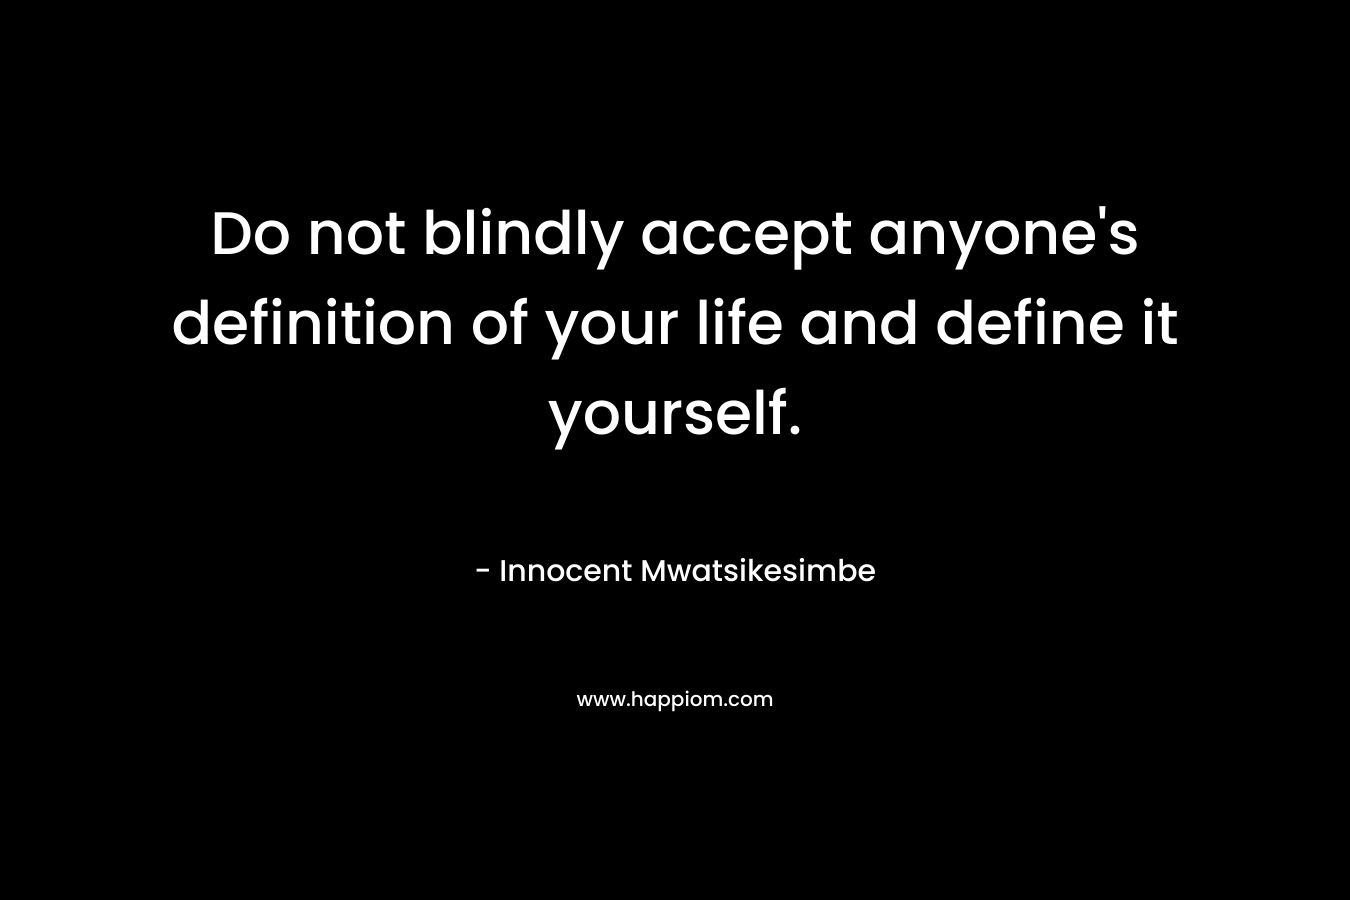 Do not blindly accept anyone’s definition of your life and define it yourself. – Innocent Mwatsikesimbe